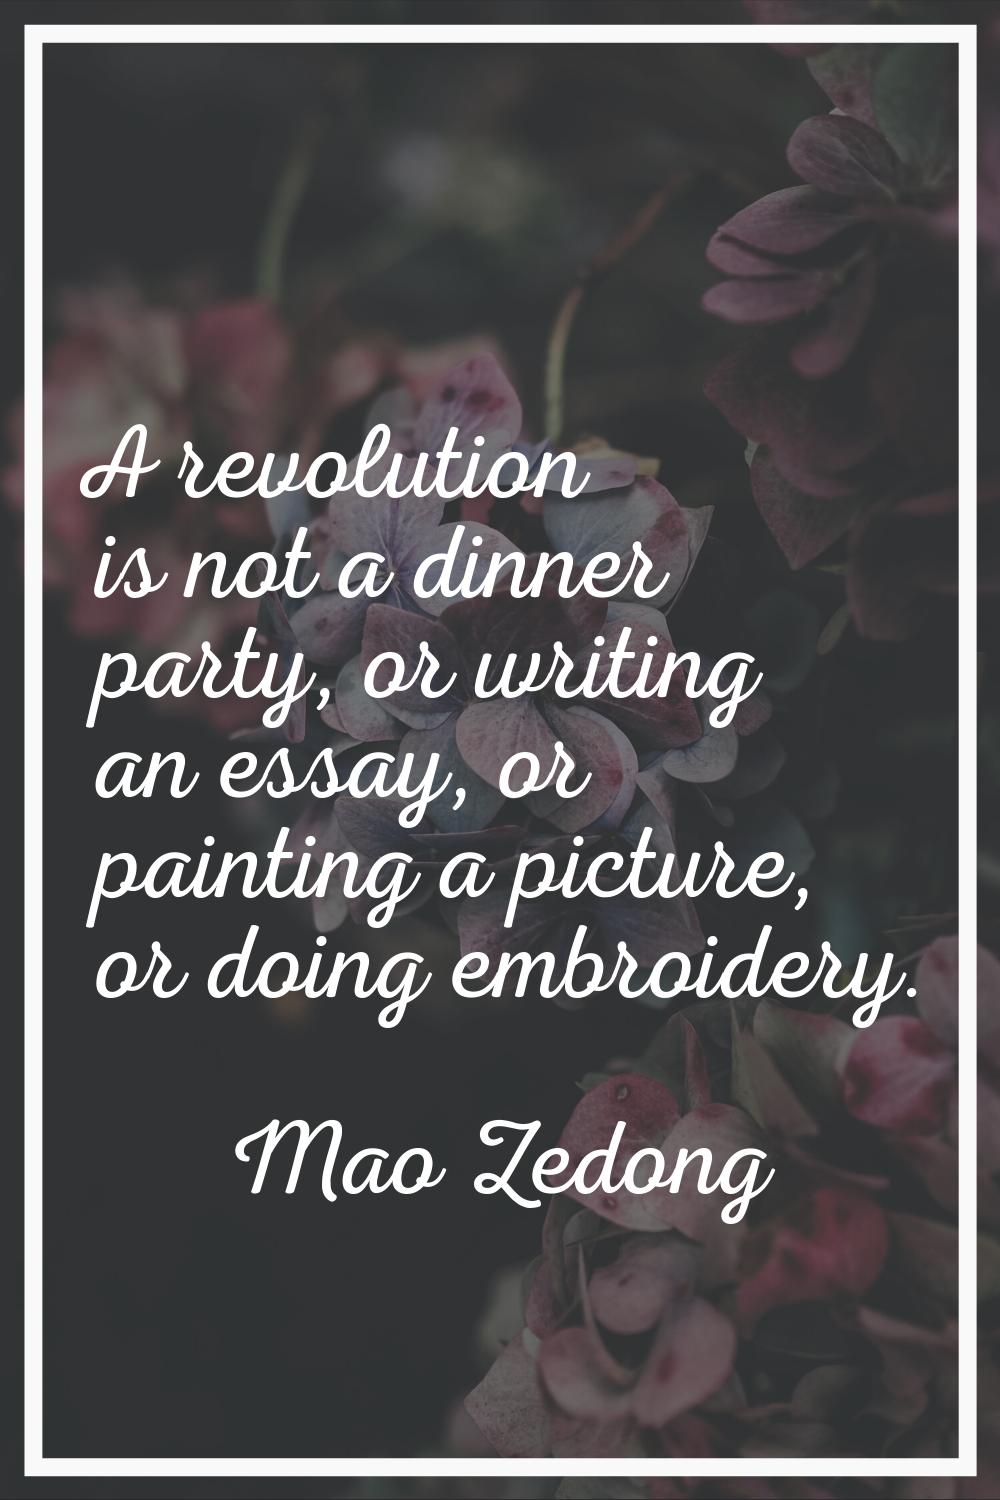 A revolution is not a dinner party, or writing an essay, or painting a picture, or doing embroidery